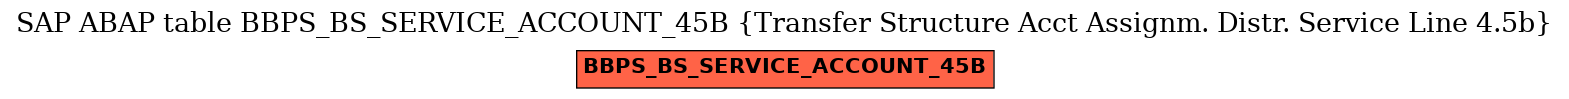 E-R Diagram for table BBPS_BS_SERVICE_ACCOUNT_45B (Transfer Structure Acct Assignm. Distr. Service Line 4.5b)